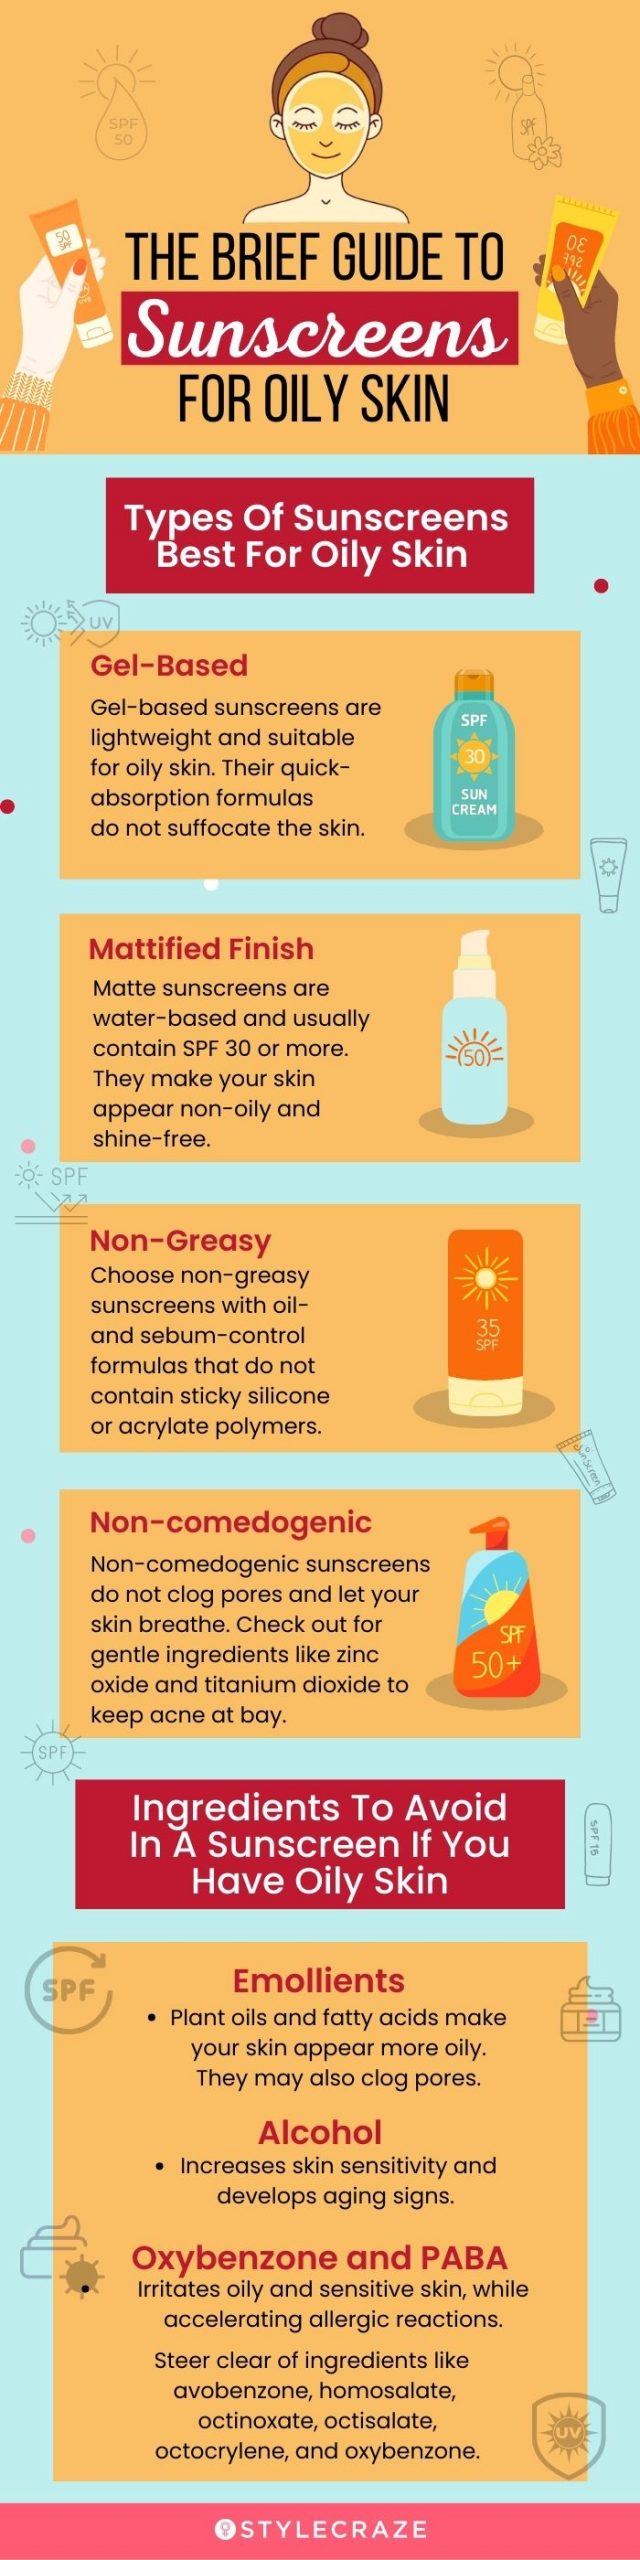 The Brief Guide To Sunscreen For Oily Skin[infographic]